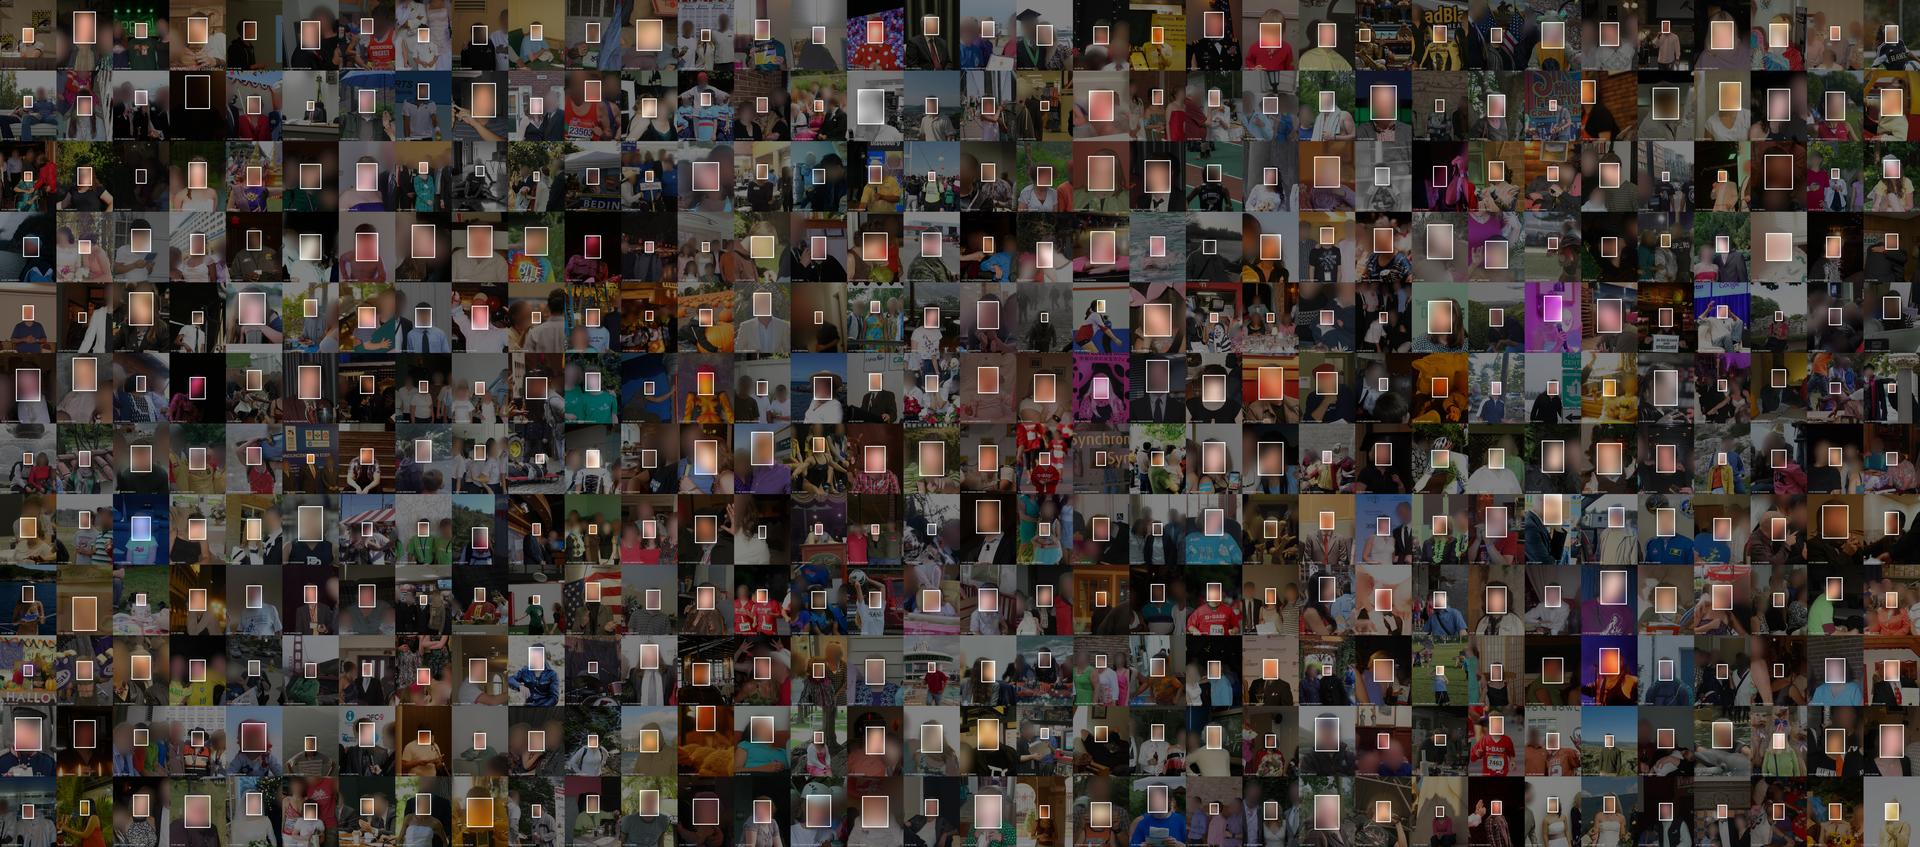 408 of about 4,753,520 face images from the MegaFace face recognition dataset. Faces blurred to protect privacy. Visualization by Adam Harvey / Exposing.ai licensed under CC-BY-NC with original images licensed and attributed under CC-BY (attribution required, no commercial use).